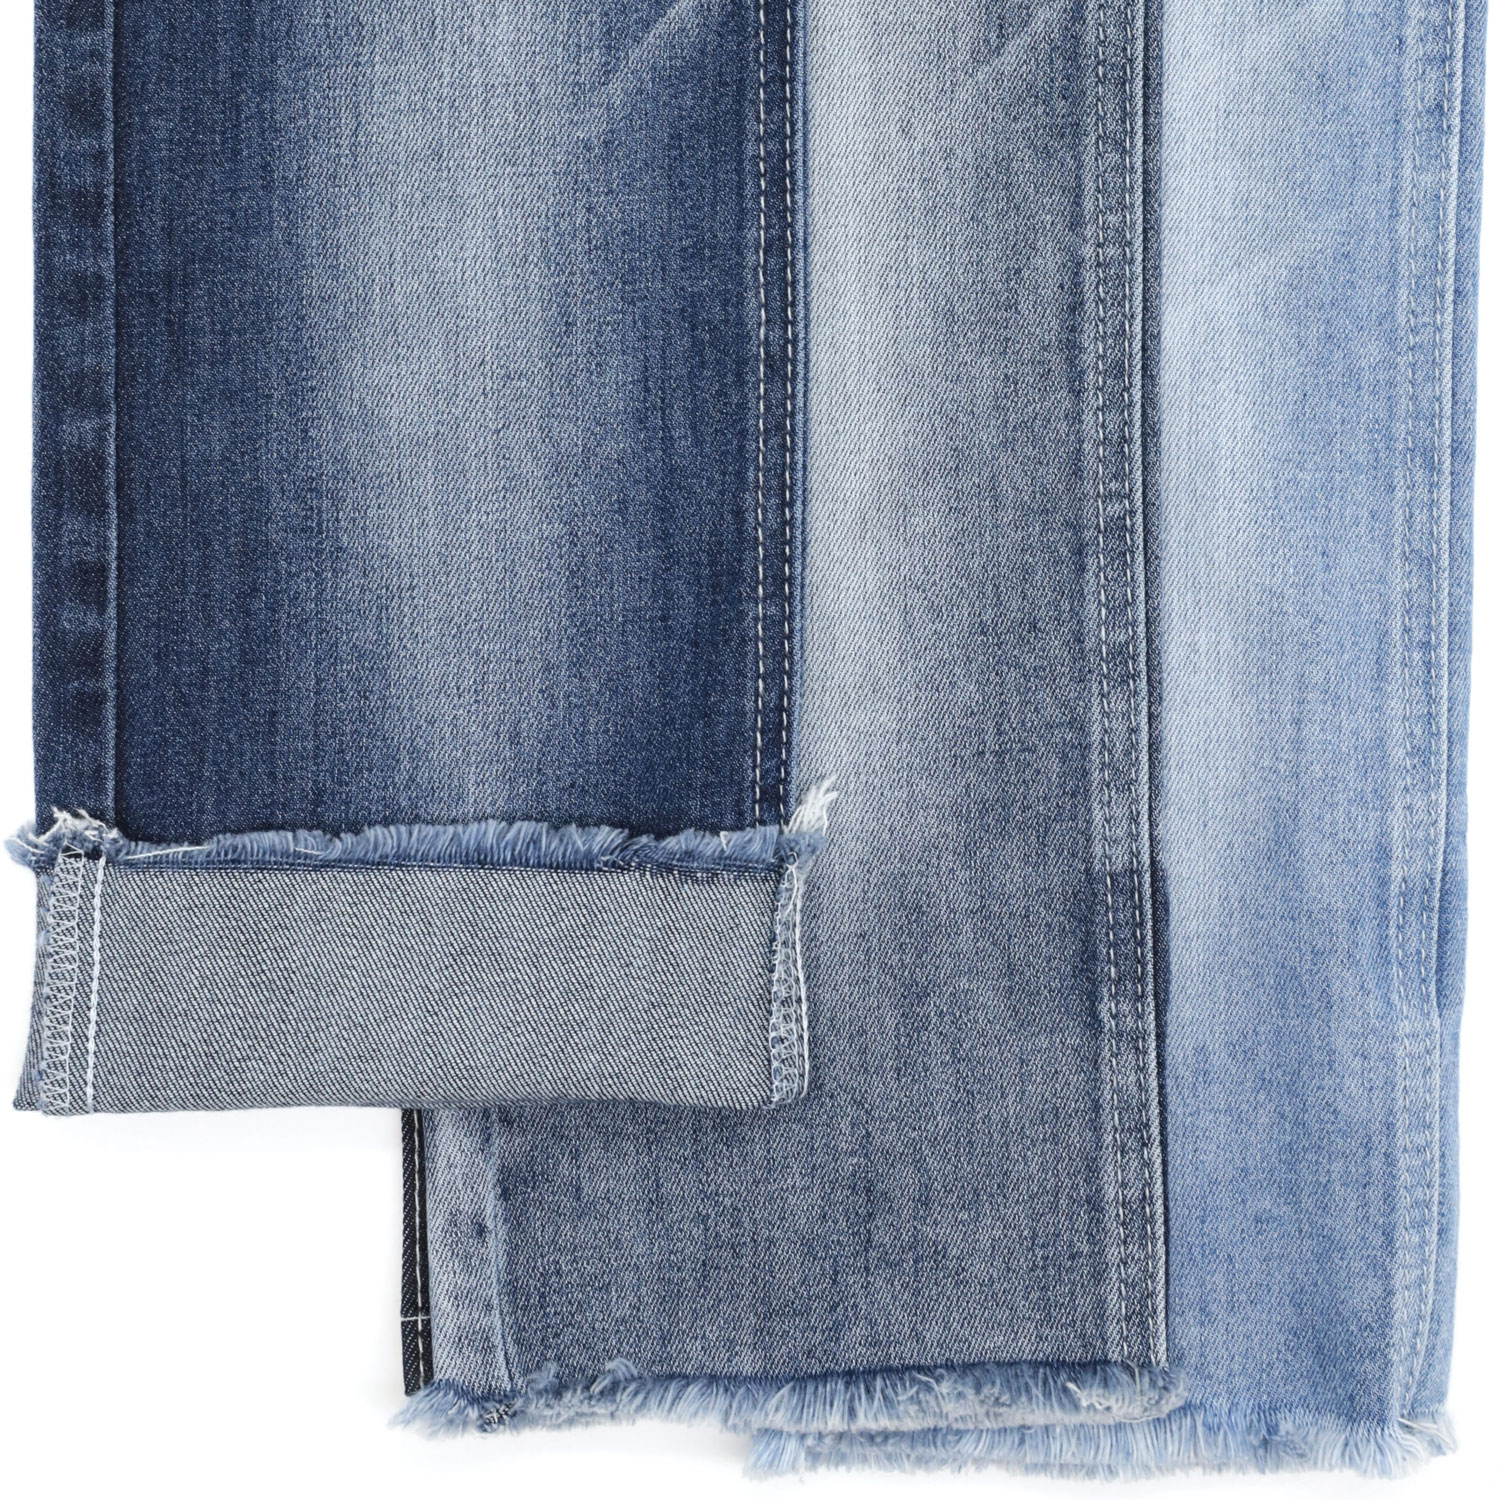 Top Reasons for Using a Denim Fabric Textile 2